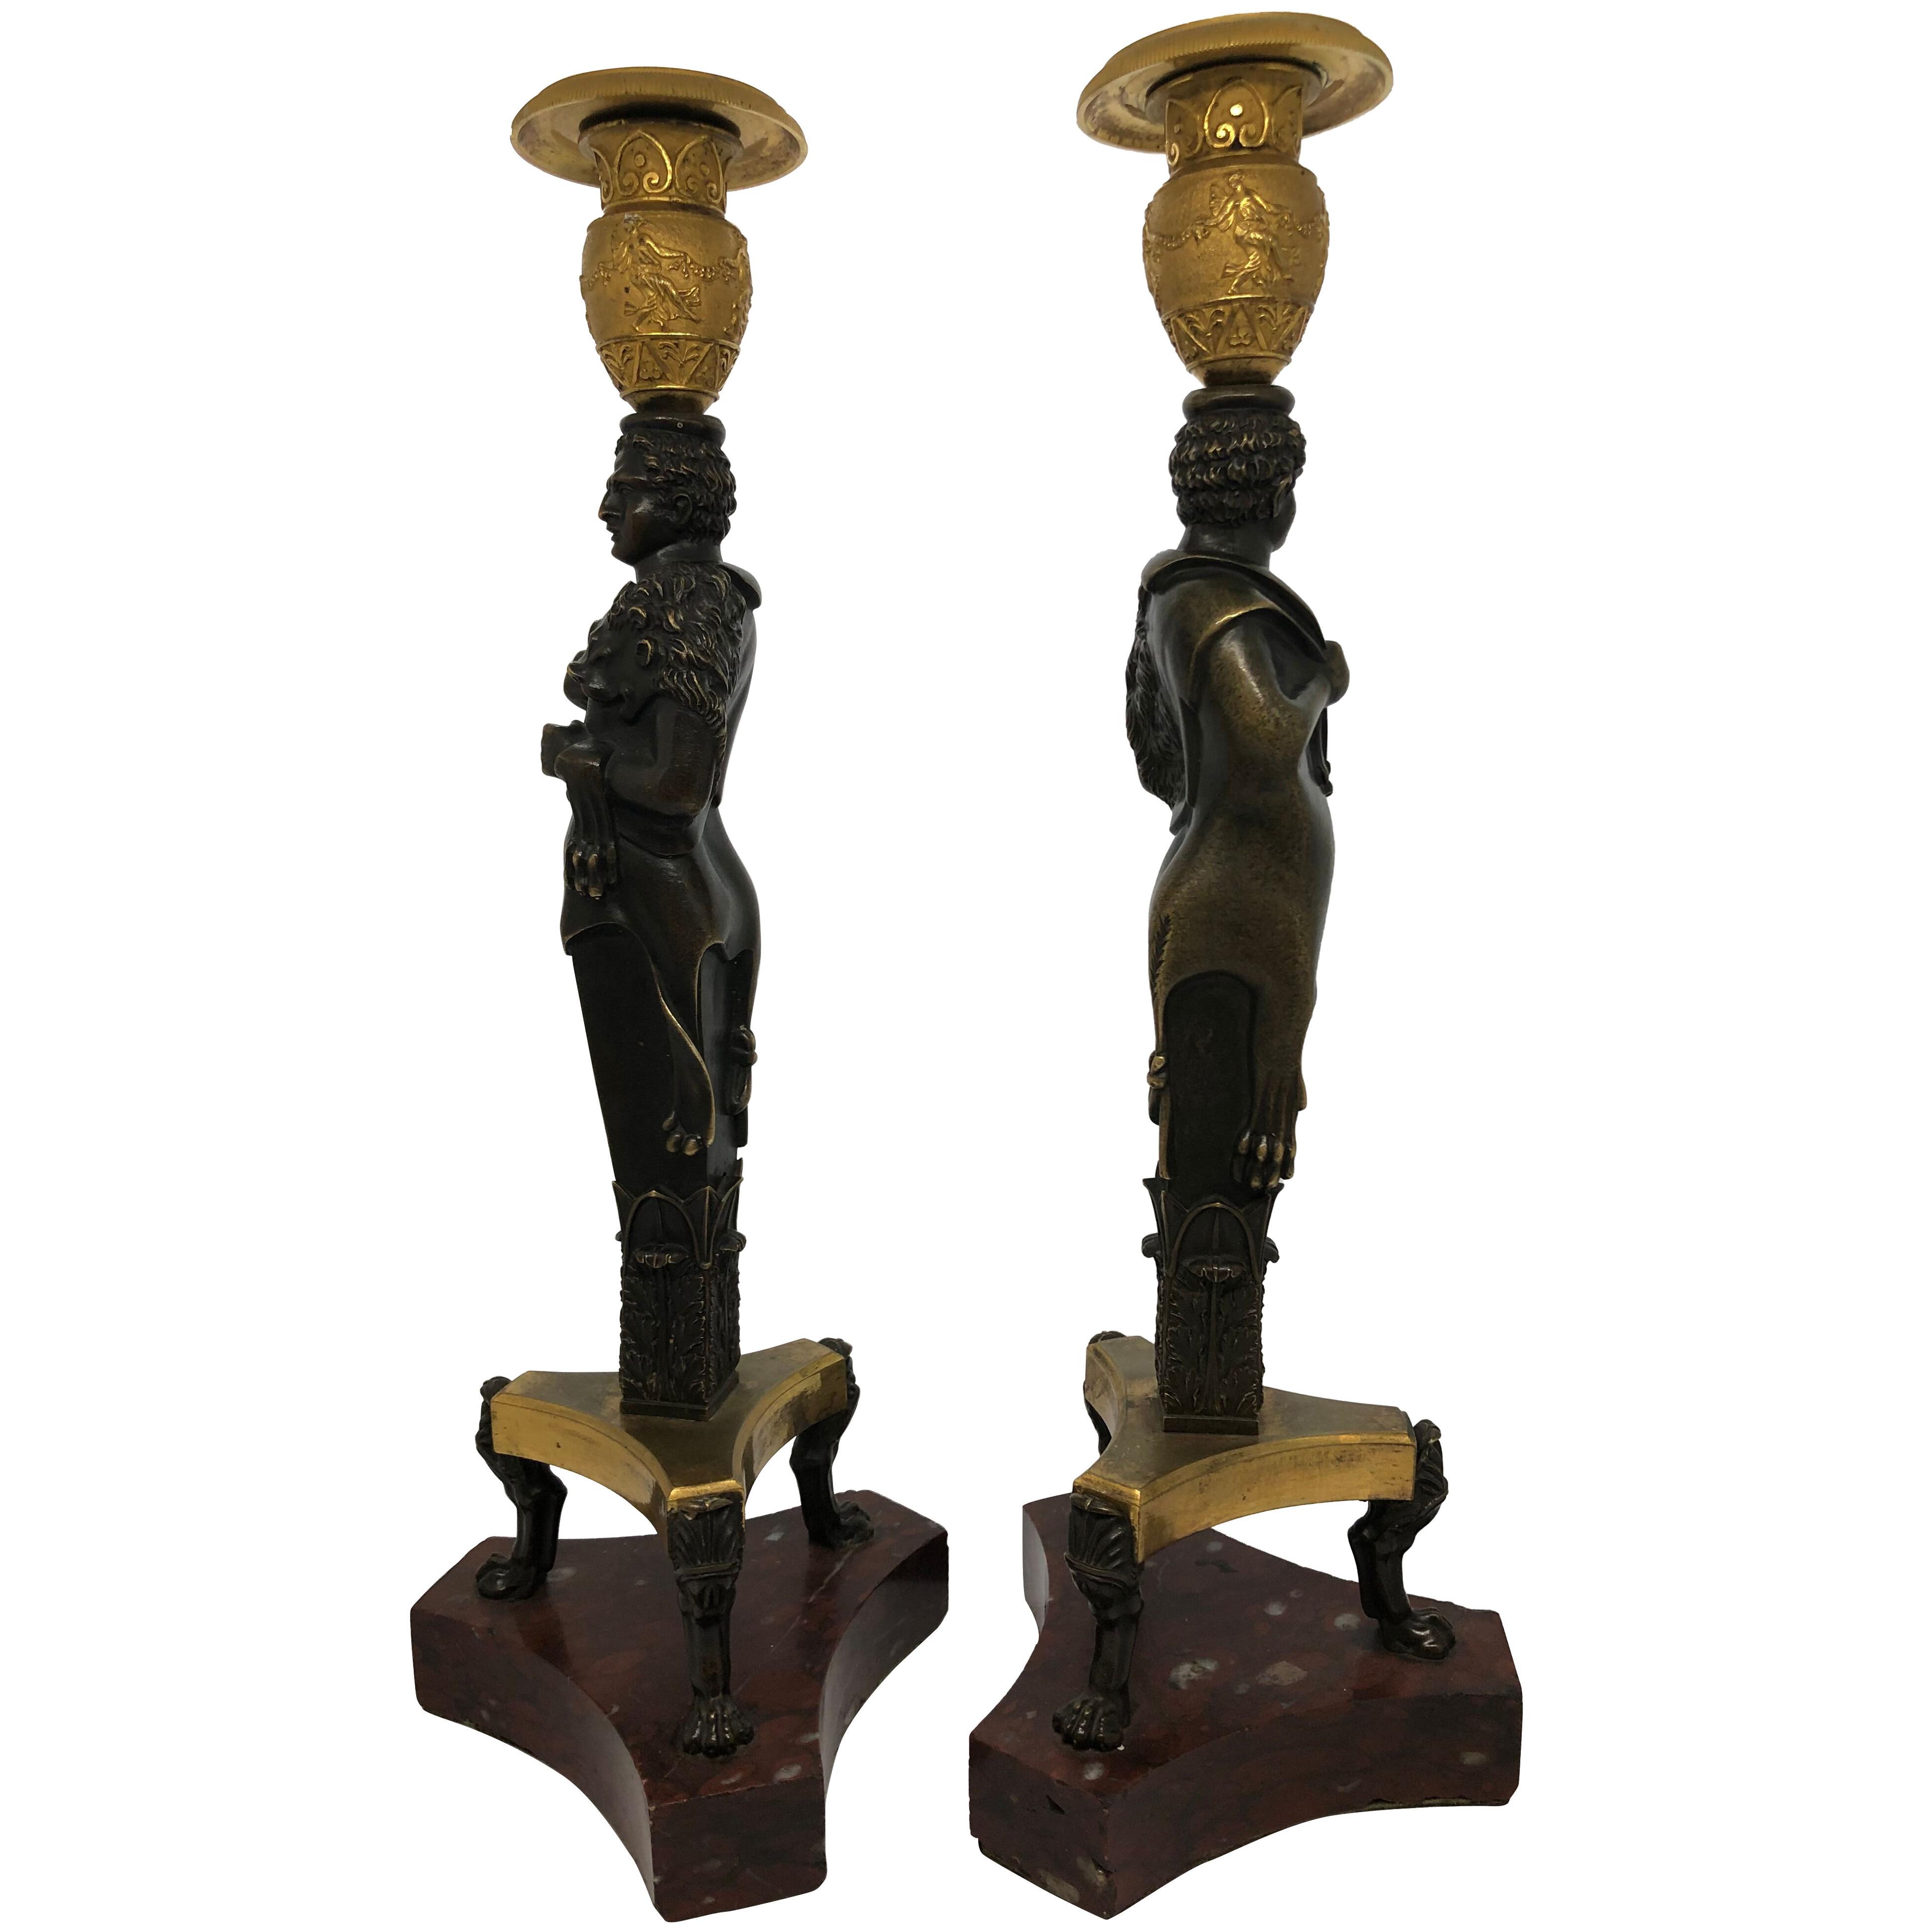 A pair of candlesticks, early 19th c.